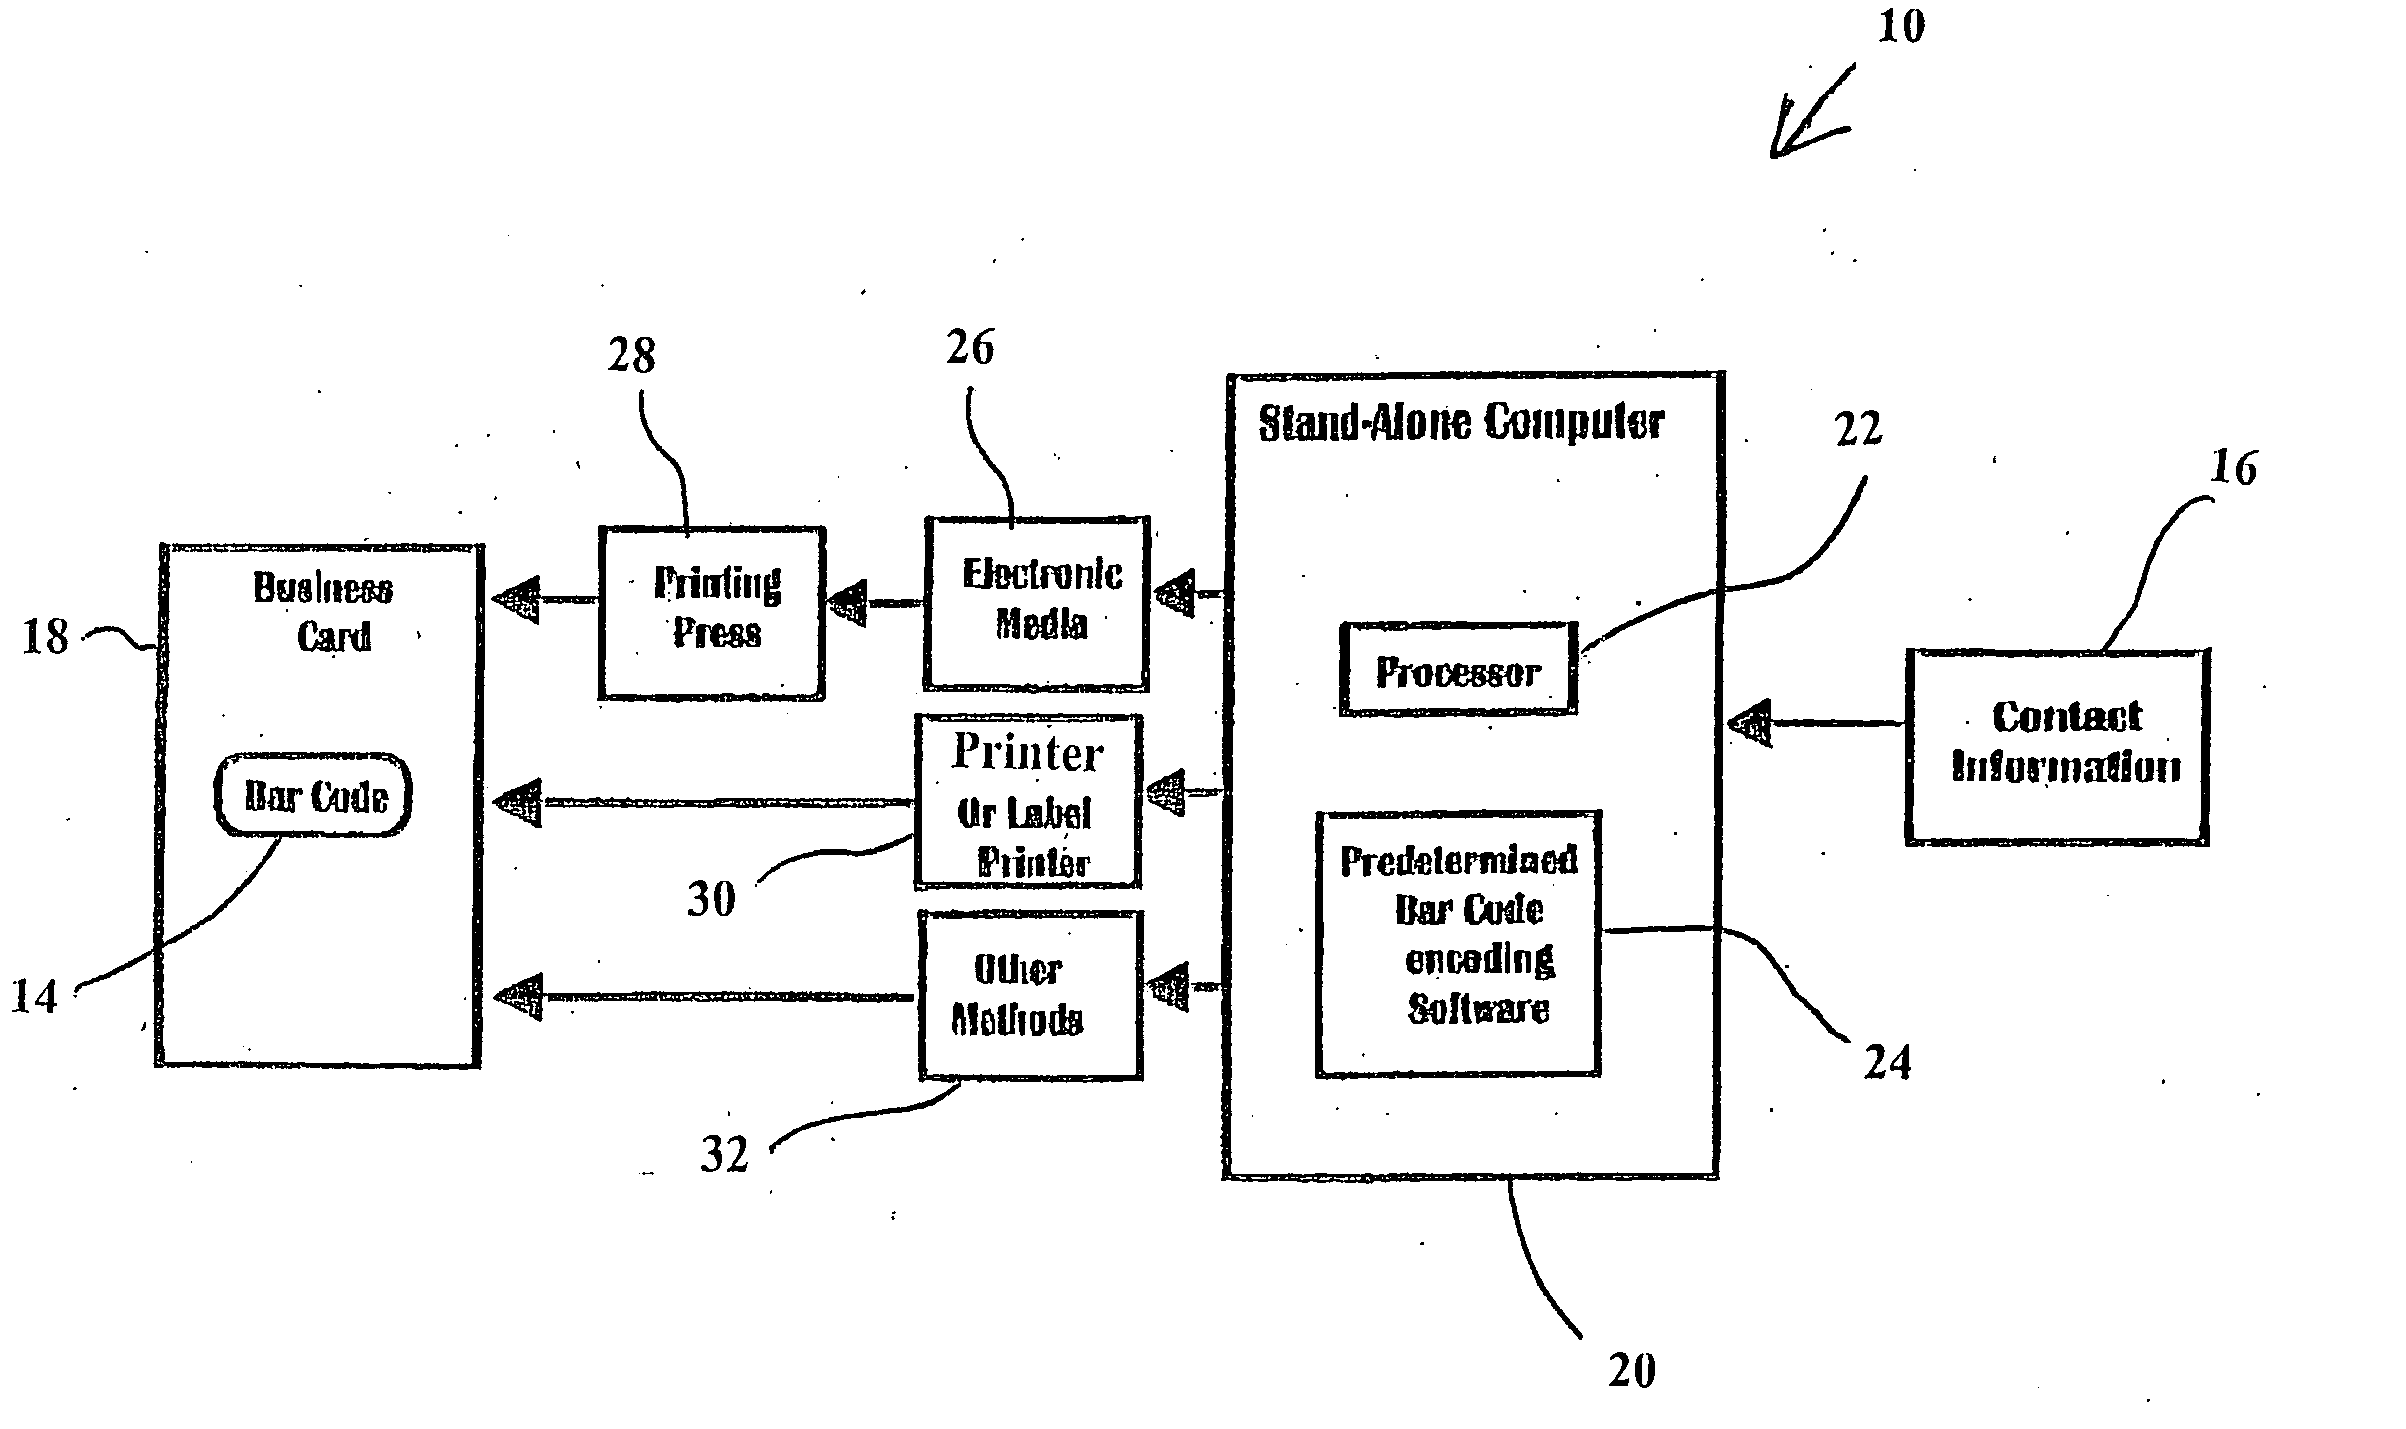 Bar-coded business card information capture and retrieval